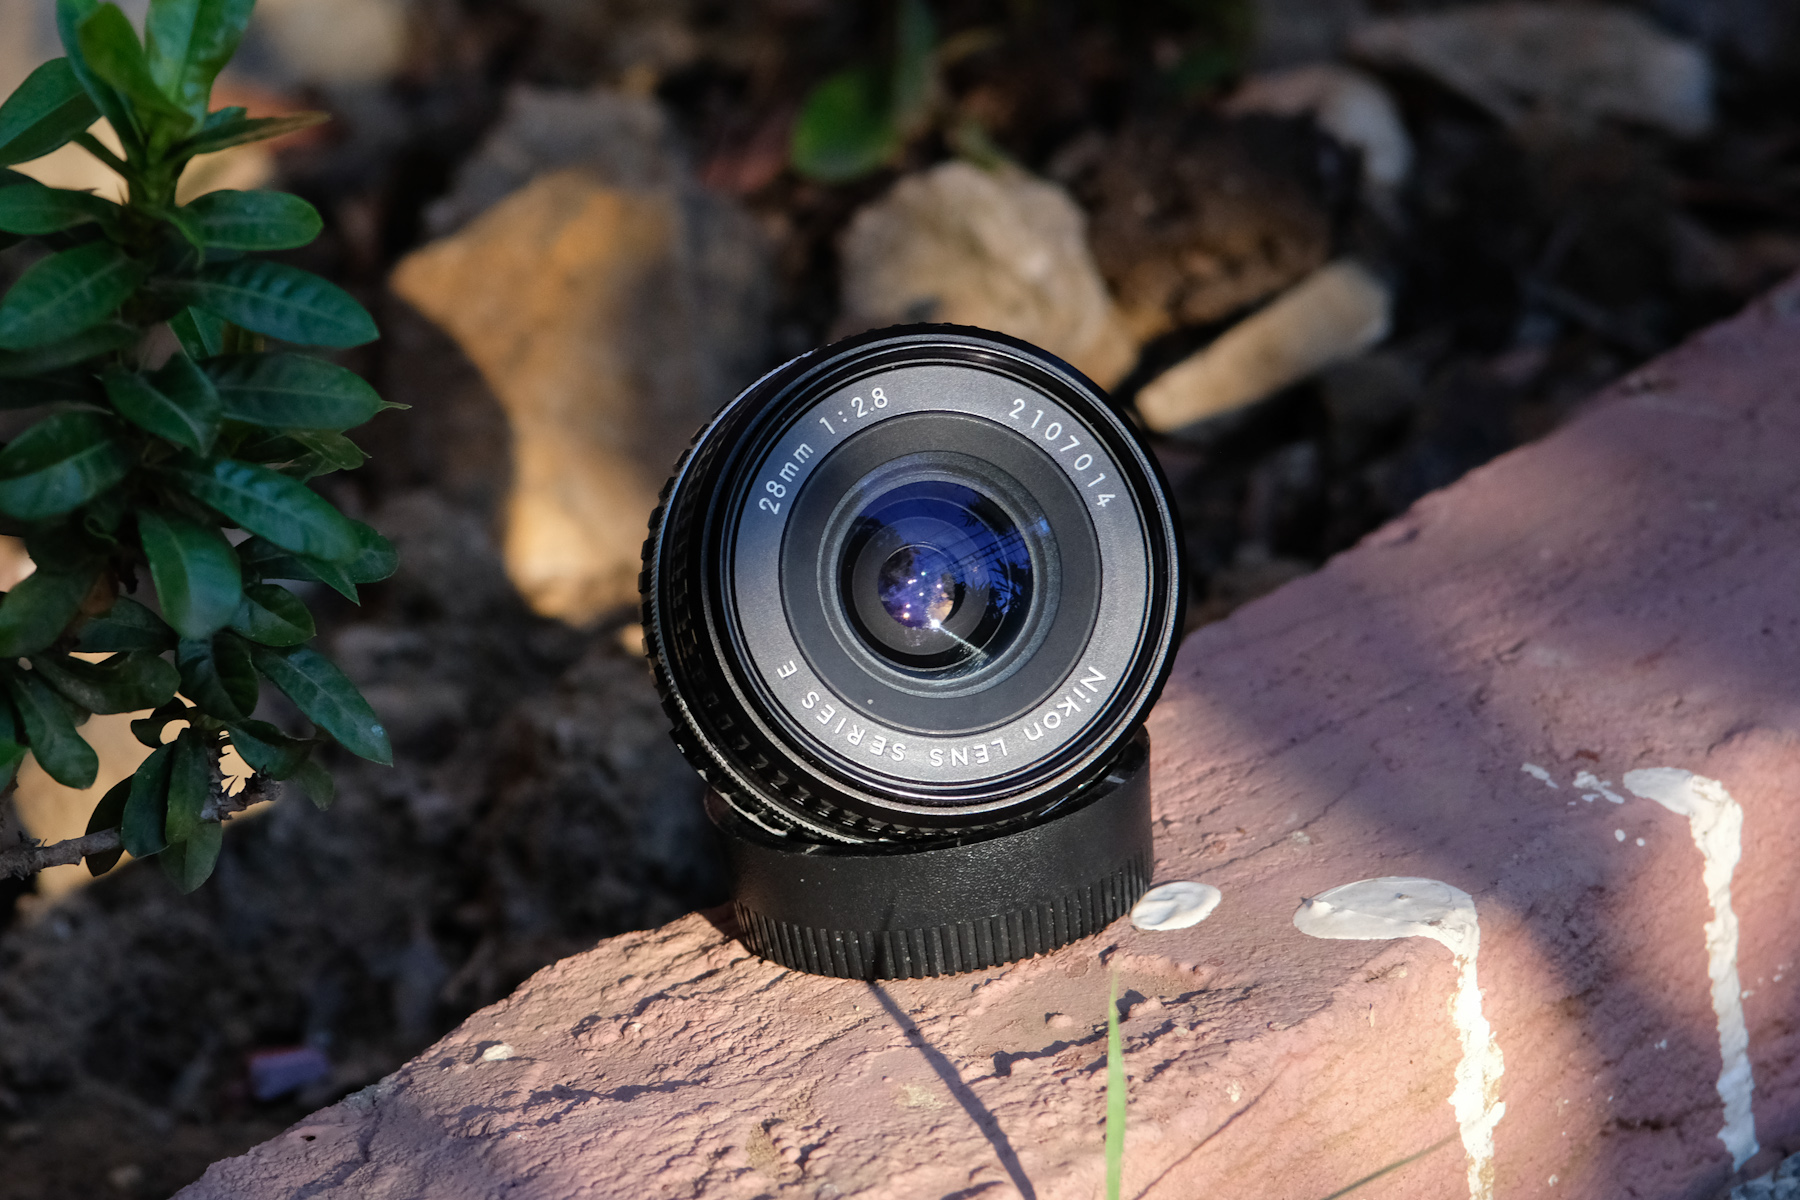 Nikkor 28mm f2.8 E review – Affordable wide angle manual lens